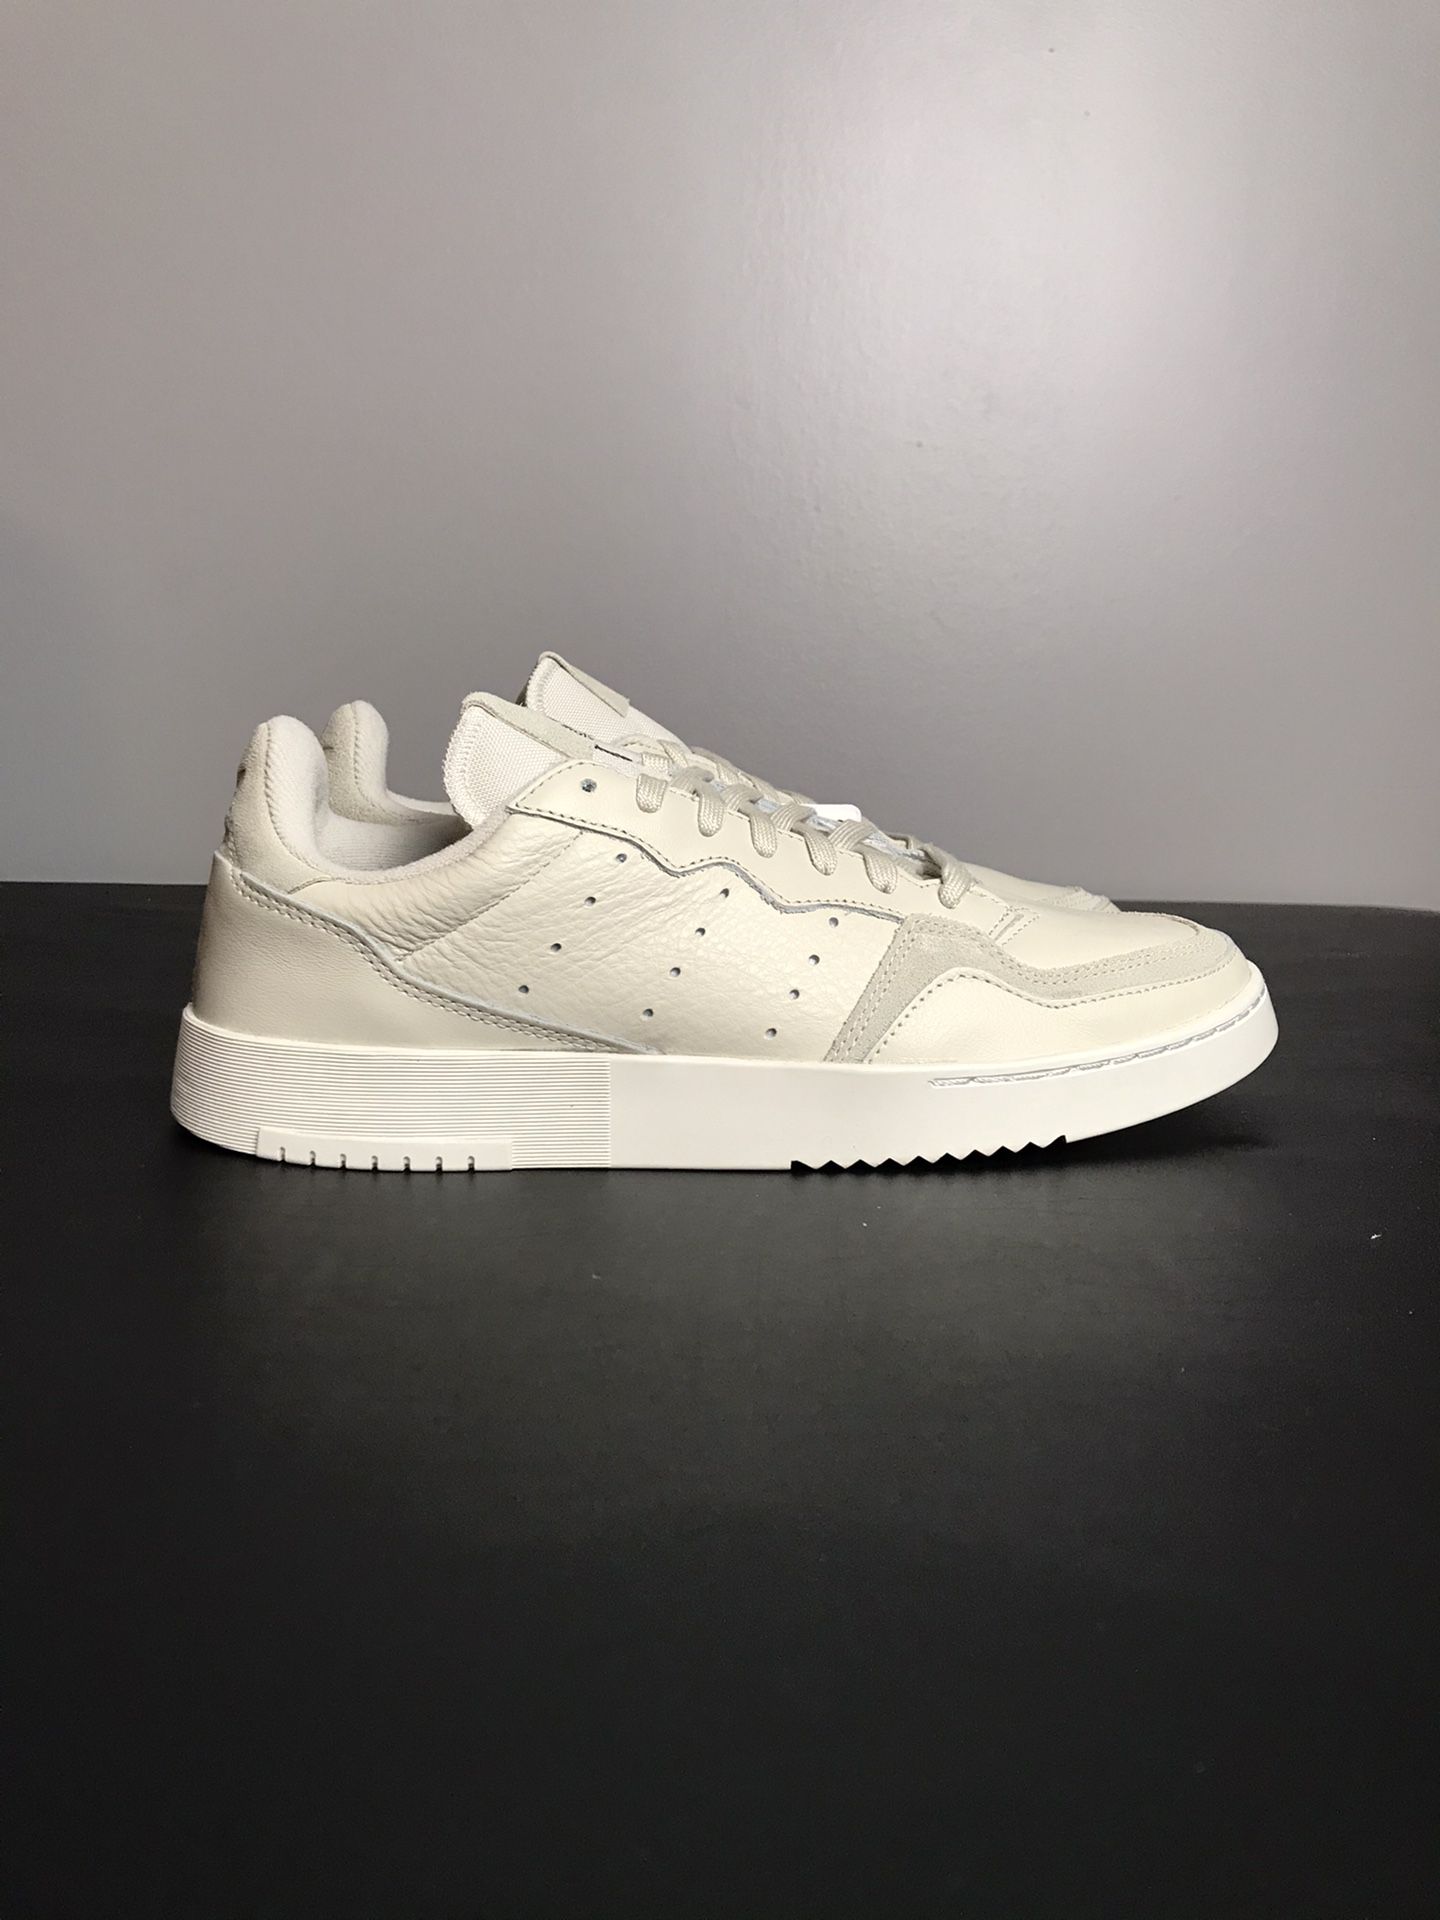 Adidas Supercourt Originals EE6031 Raw White New Without Box